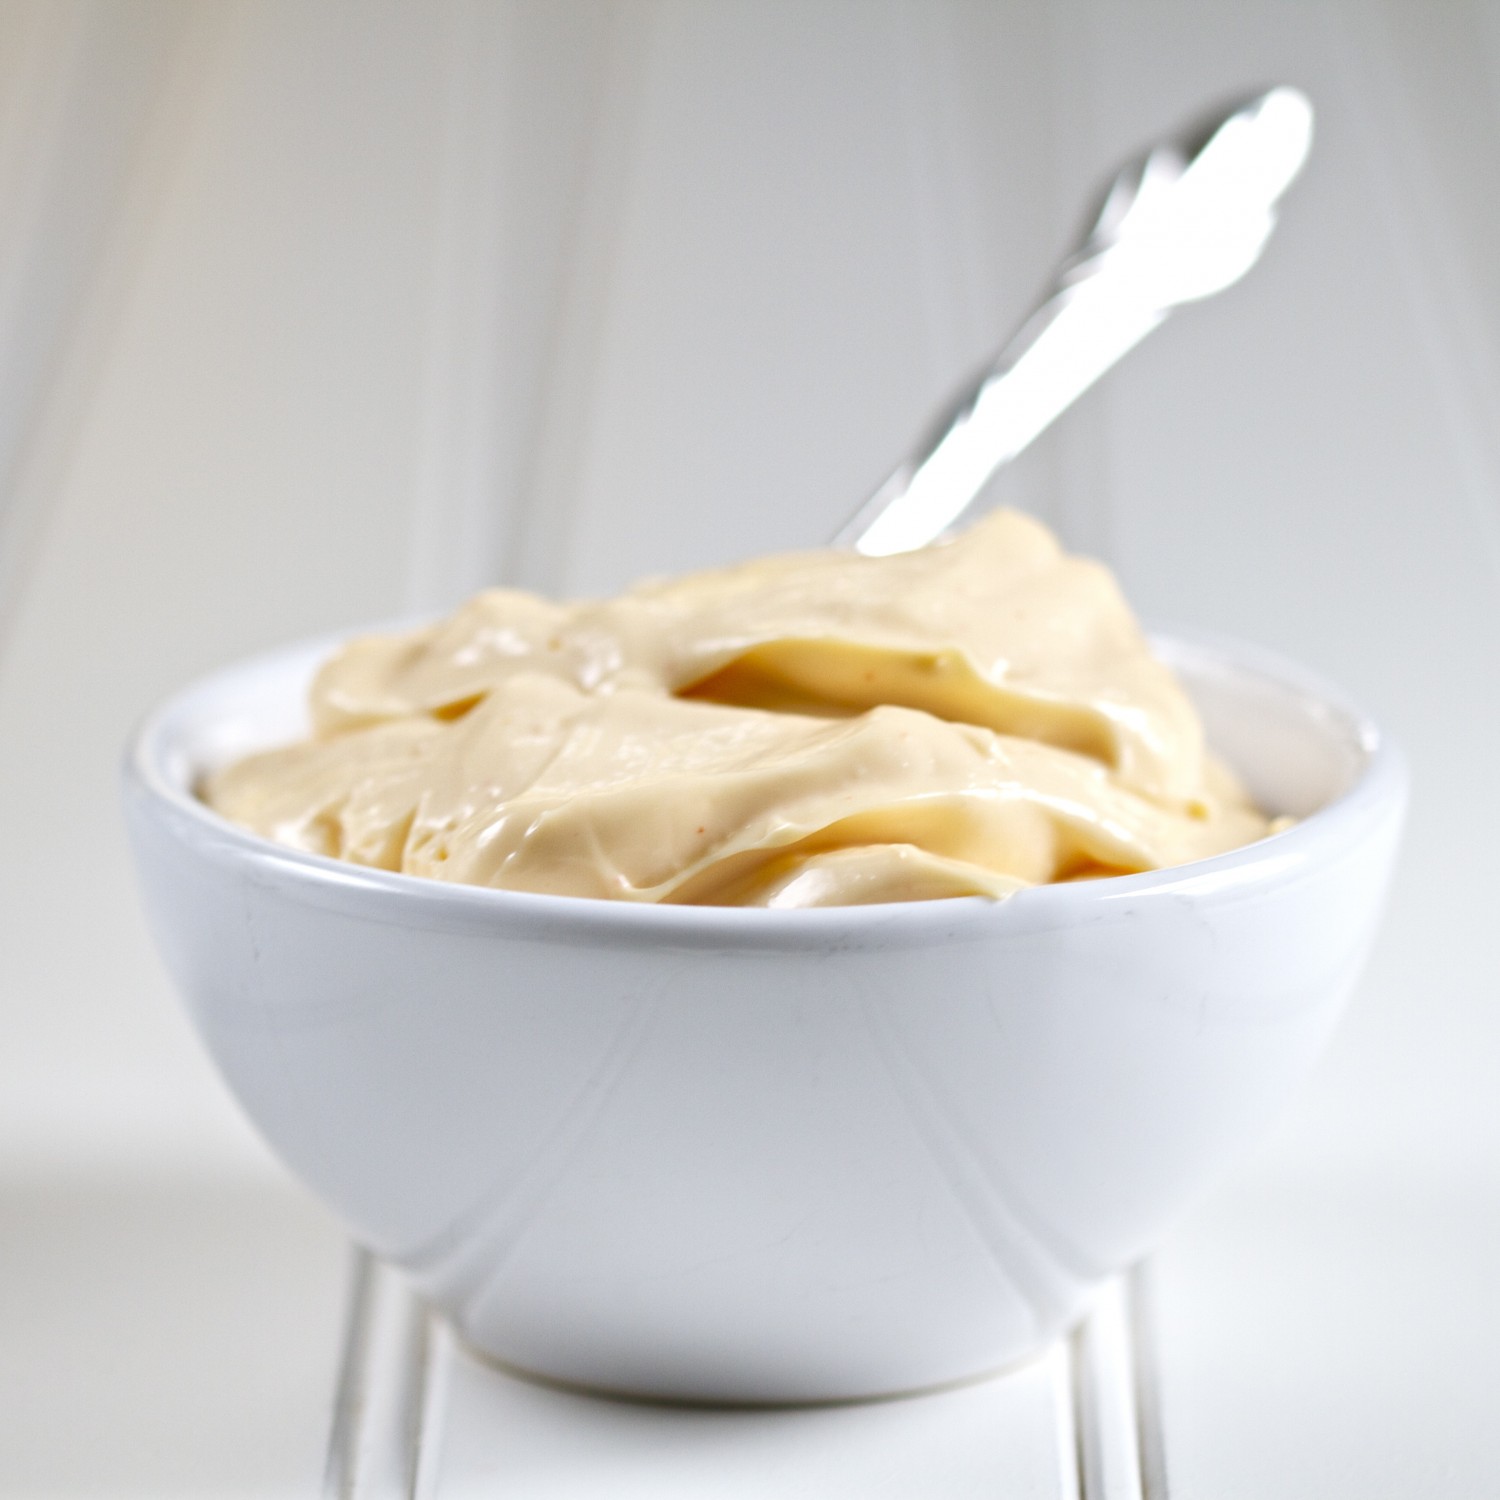 Basic Mayonnaise Recipe for Your Paleo Diet